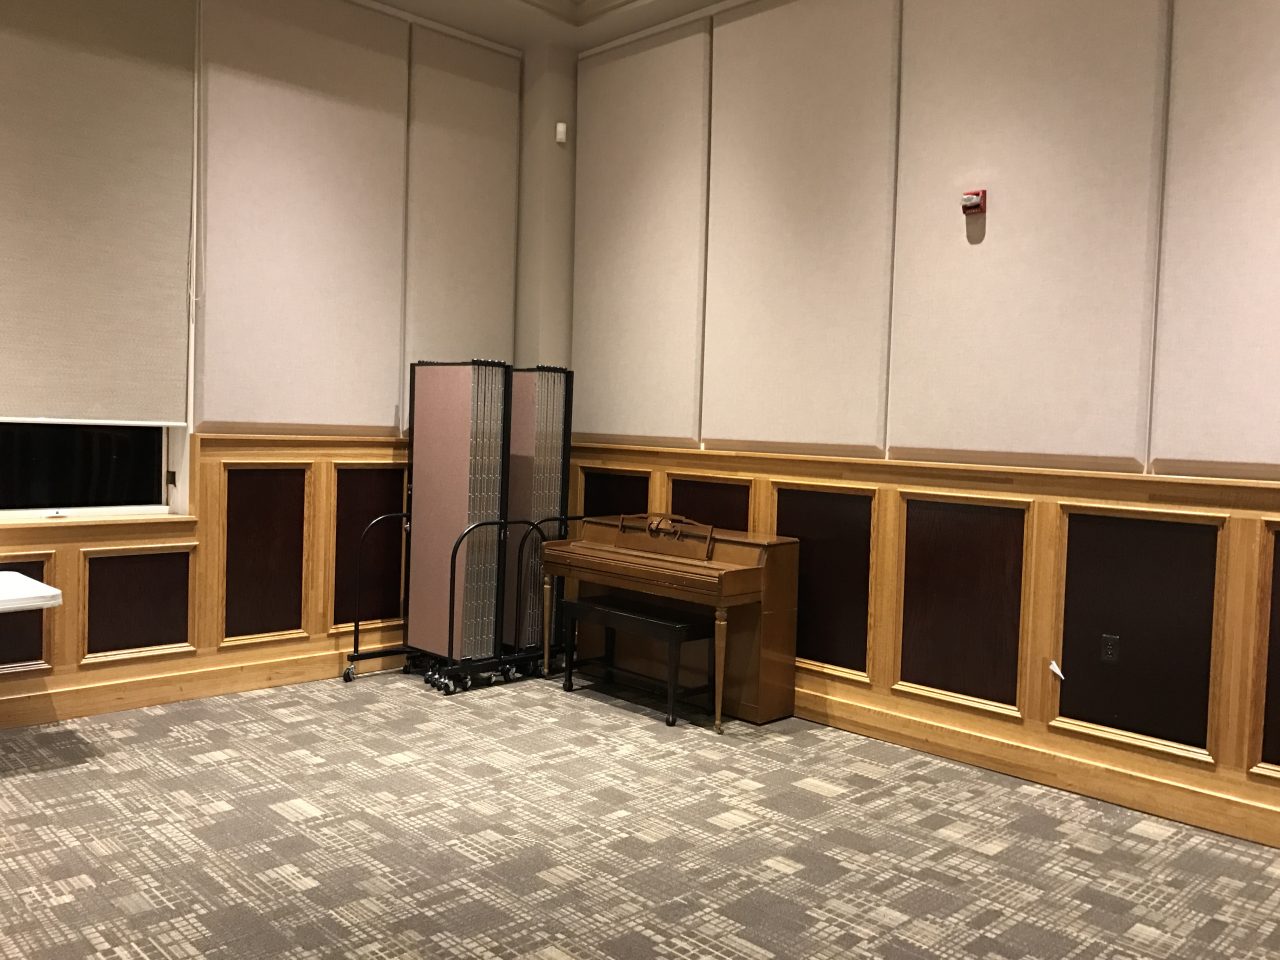 Church room divider stores compactly